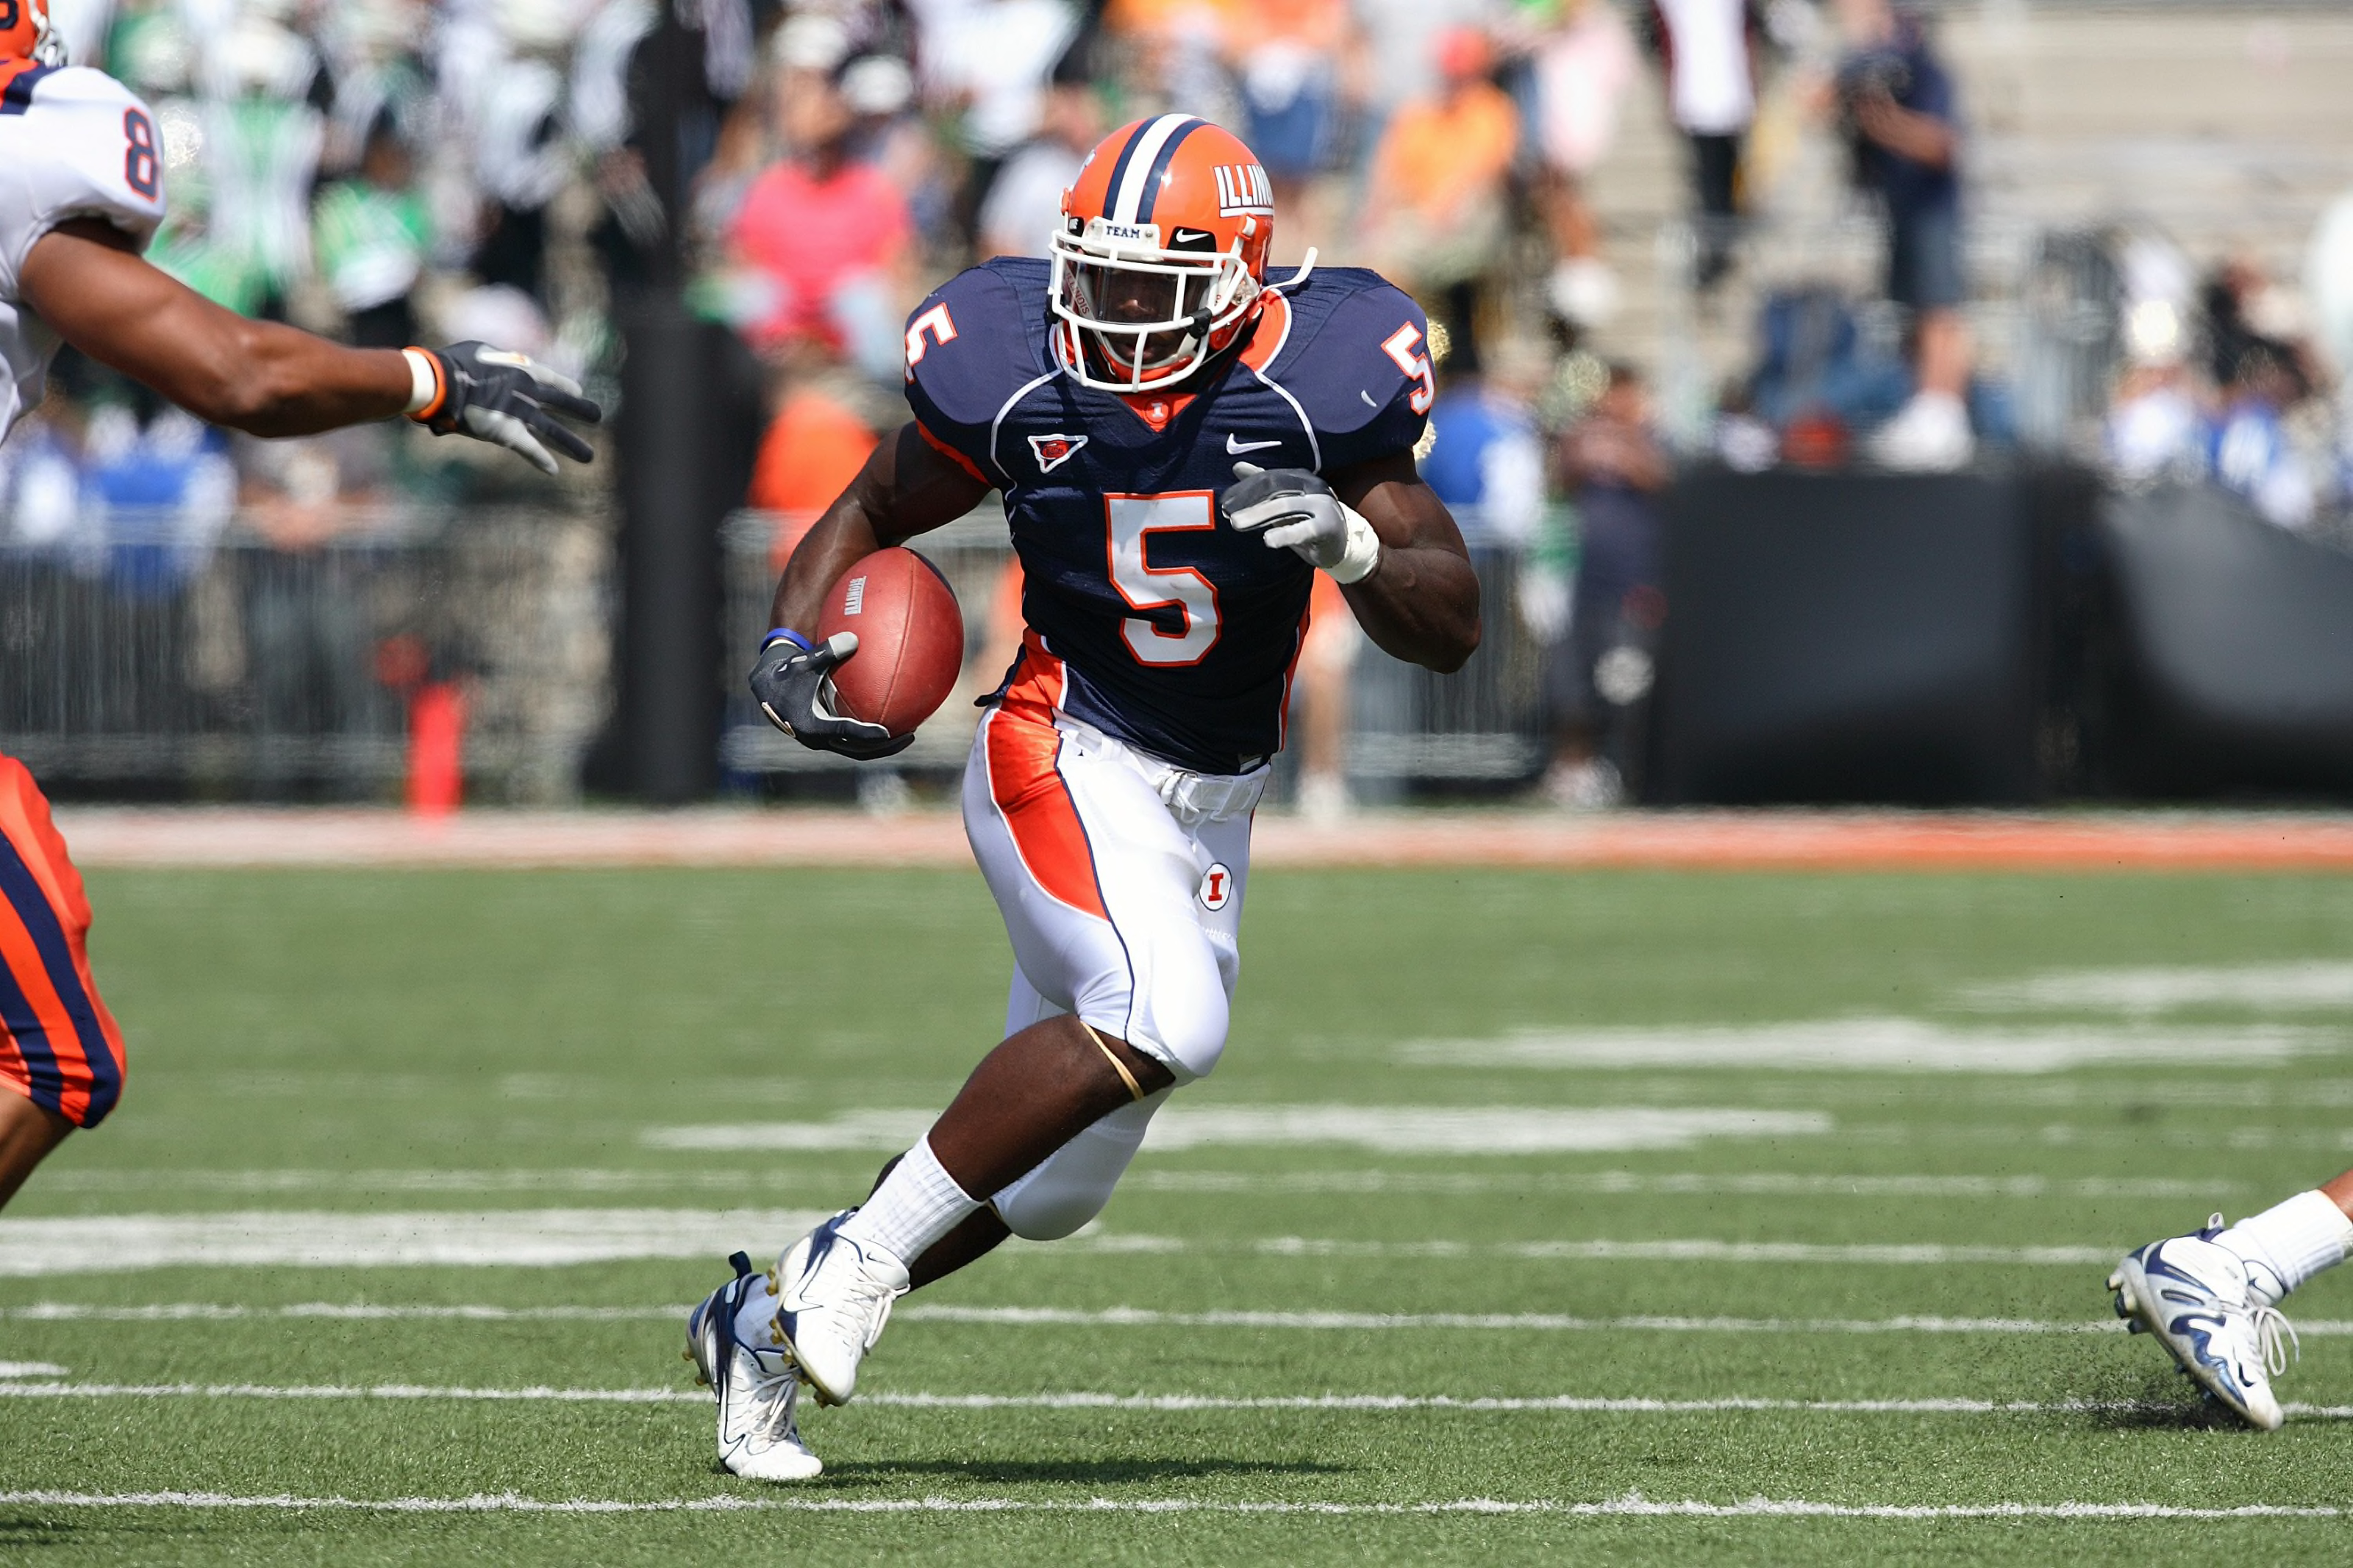 Illinois Football The 30 greatest Illini players of all time Page 25